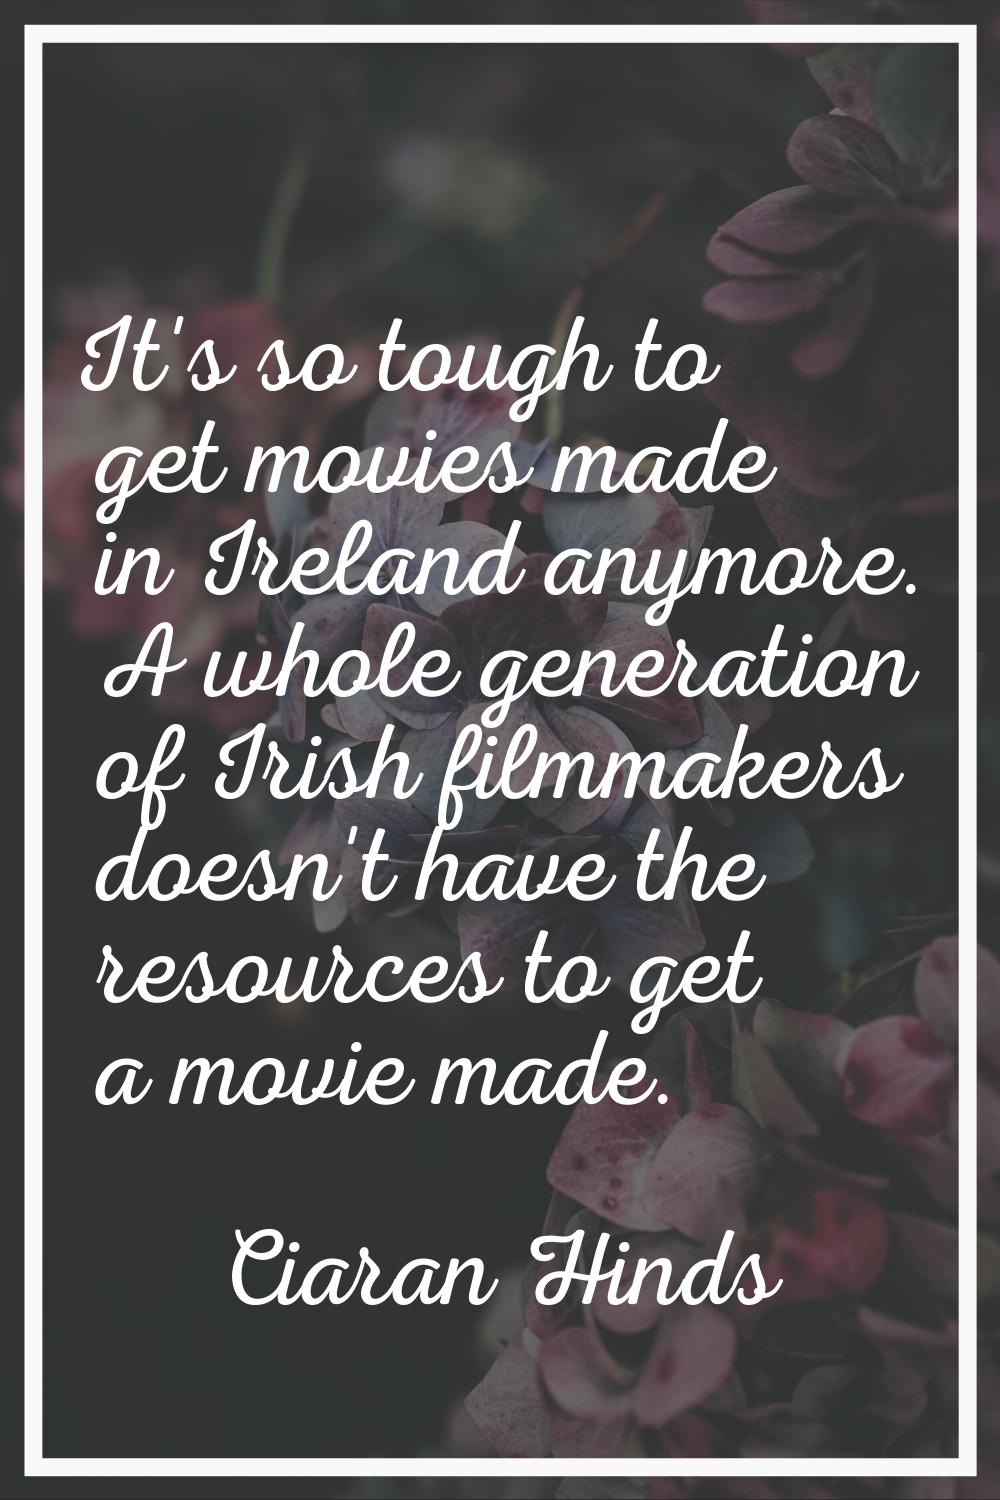 It's so tough to get movies made in Ireland anymore. A whole generation of Irish filmmakers doesn't